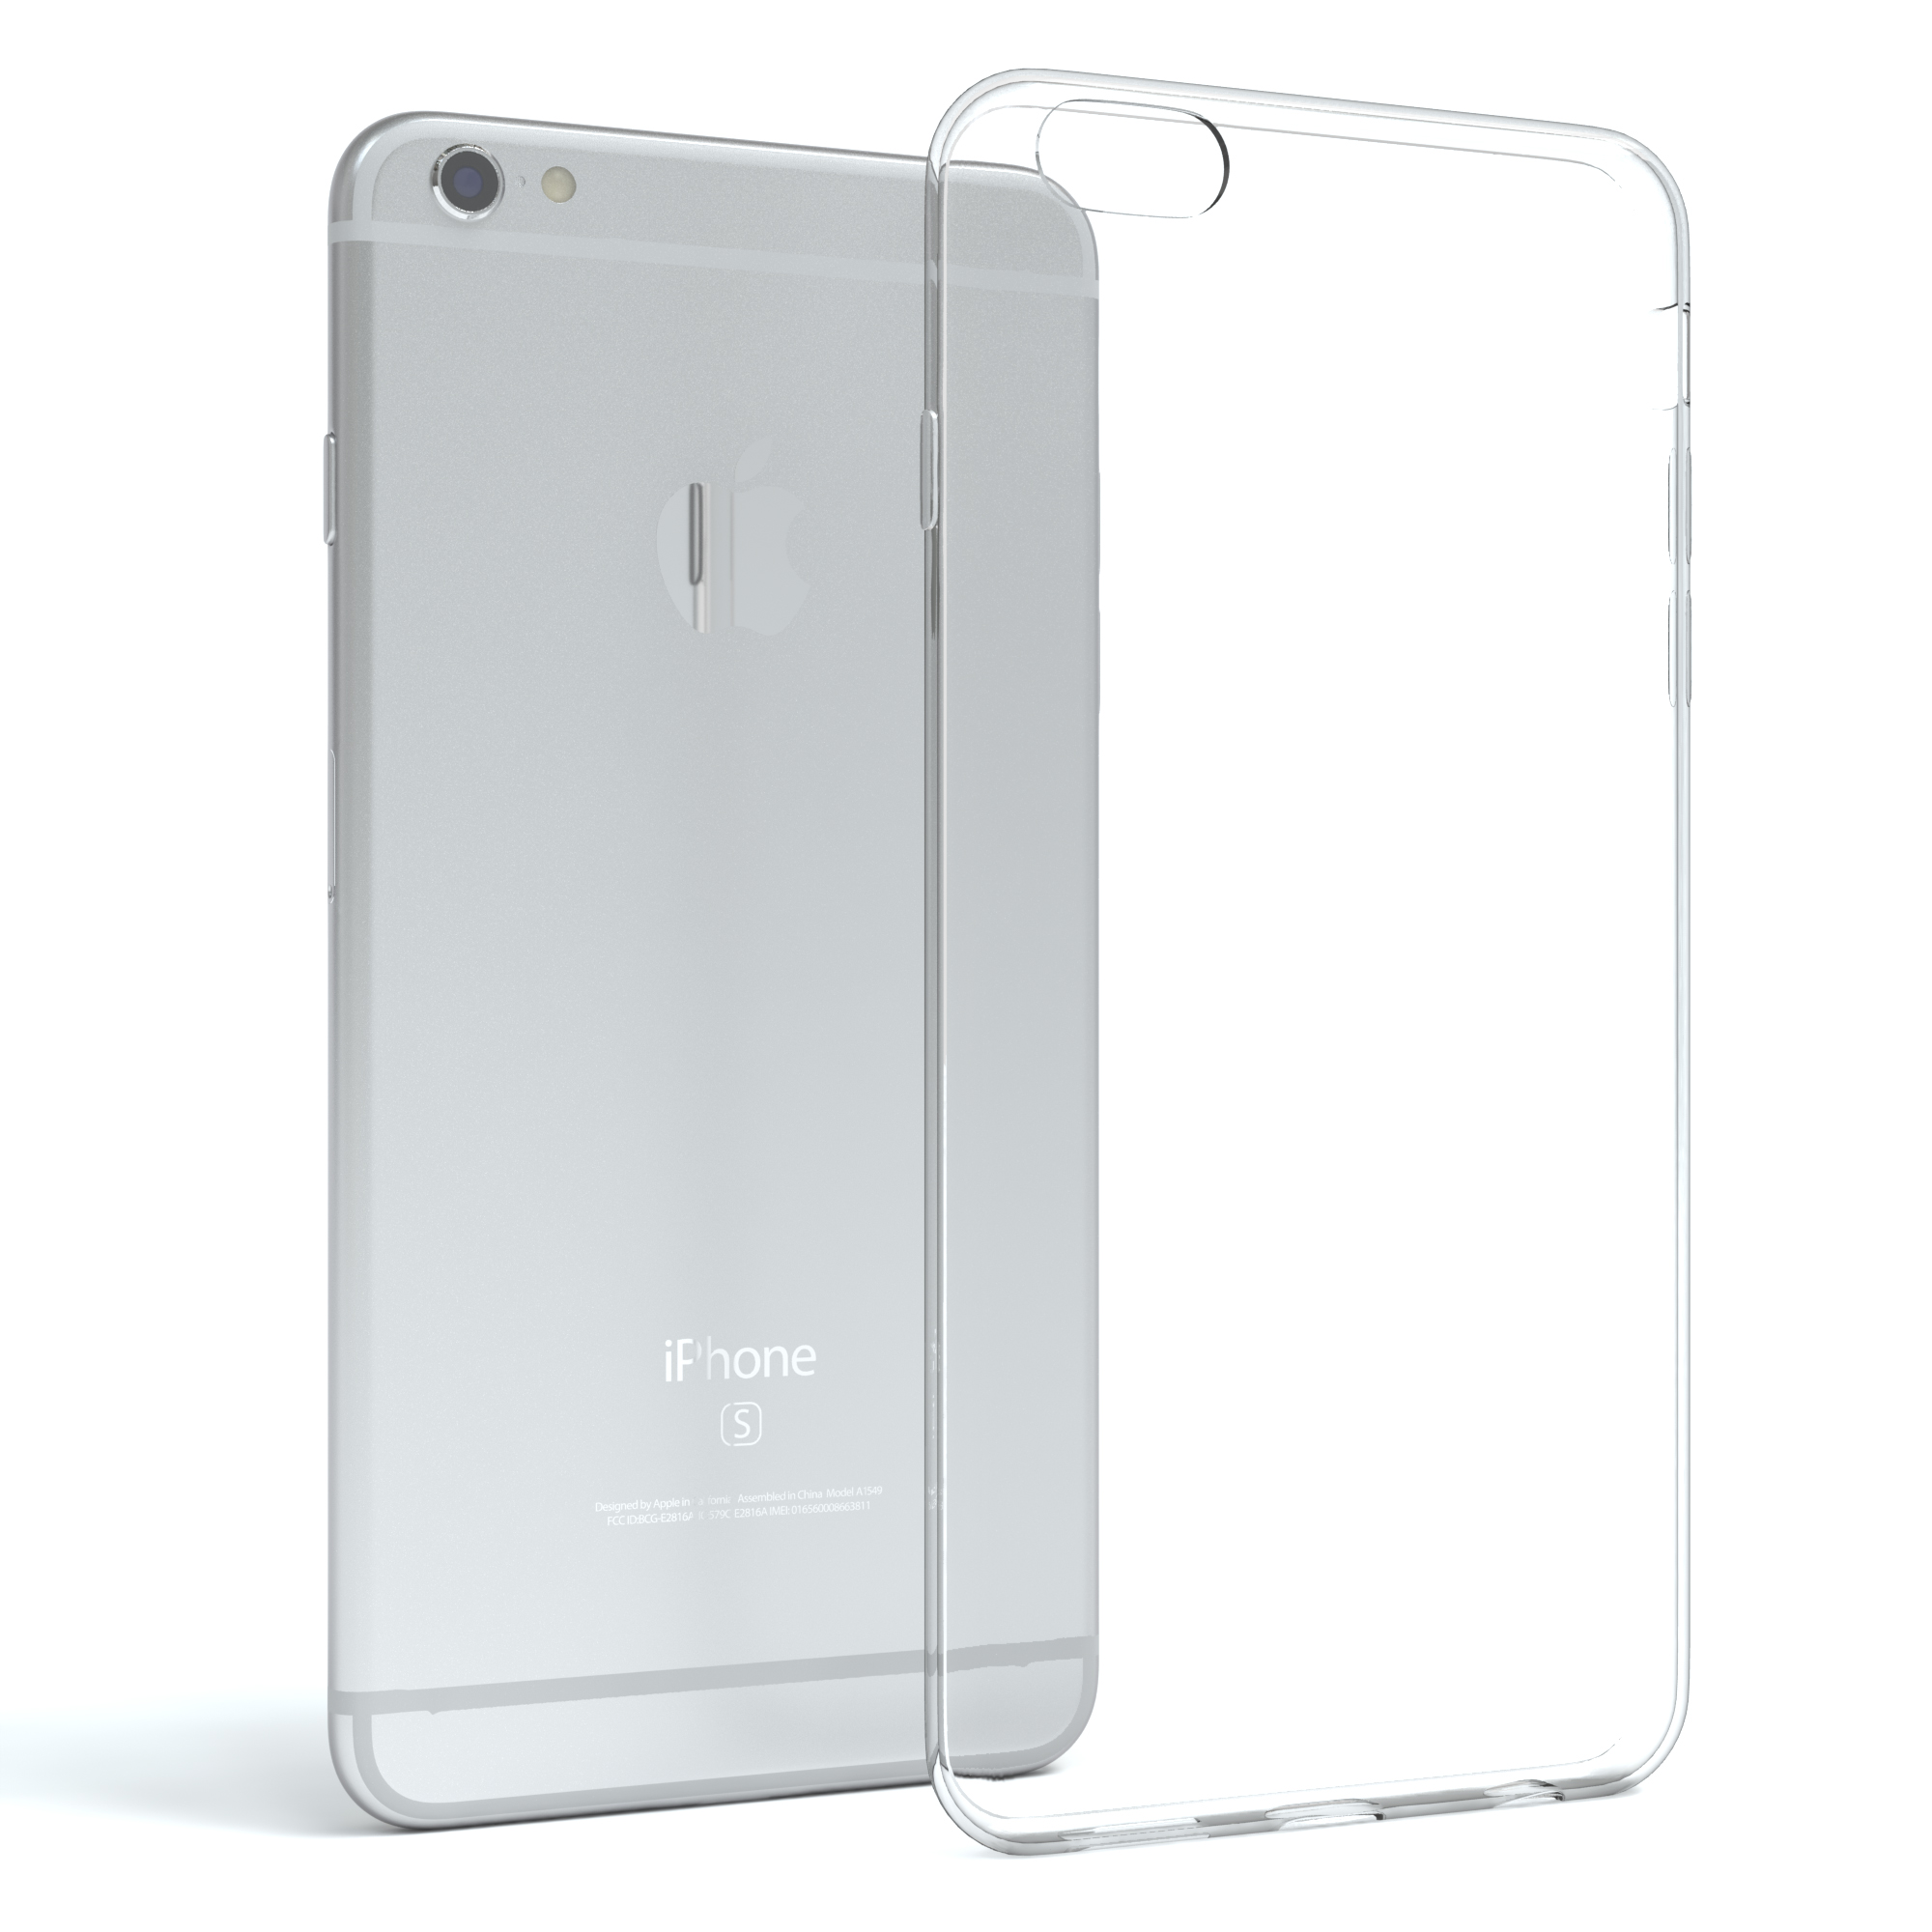 EAZY CASE Crystal Clear Backcover, iPhone Klar AirSpace / Structure, X XS, Apple